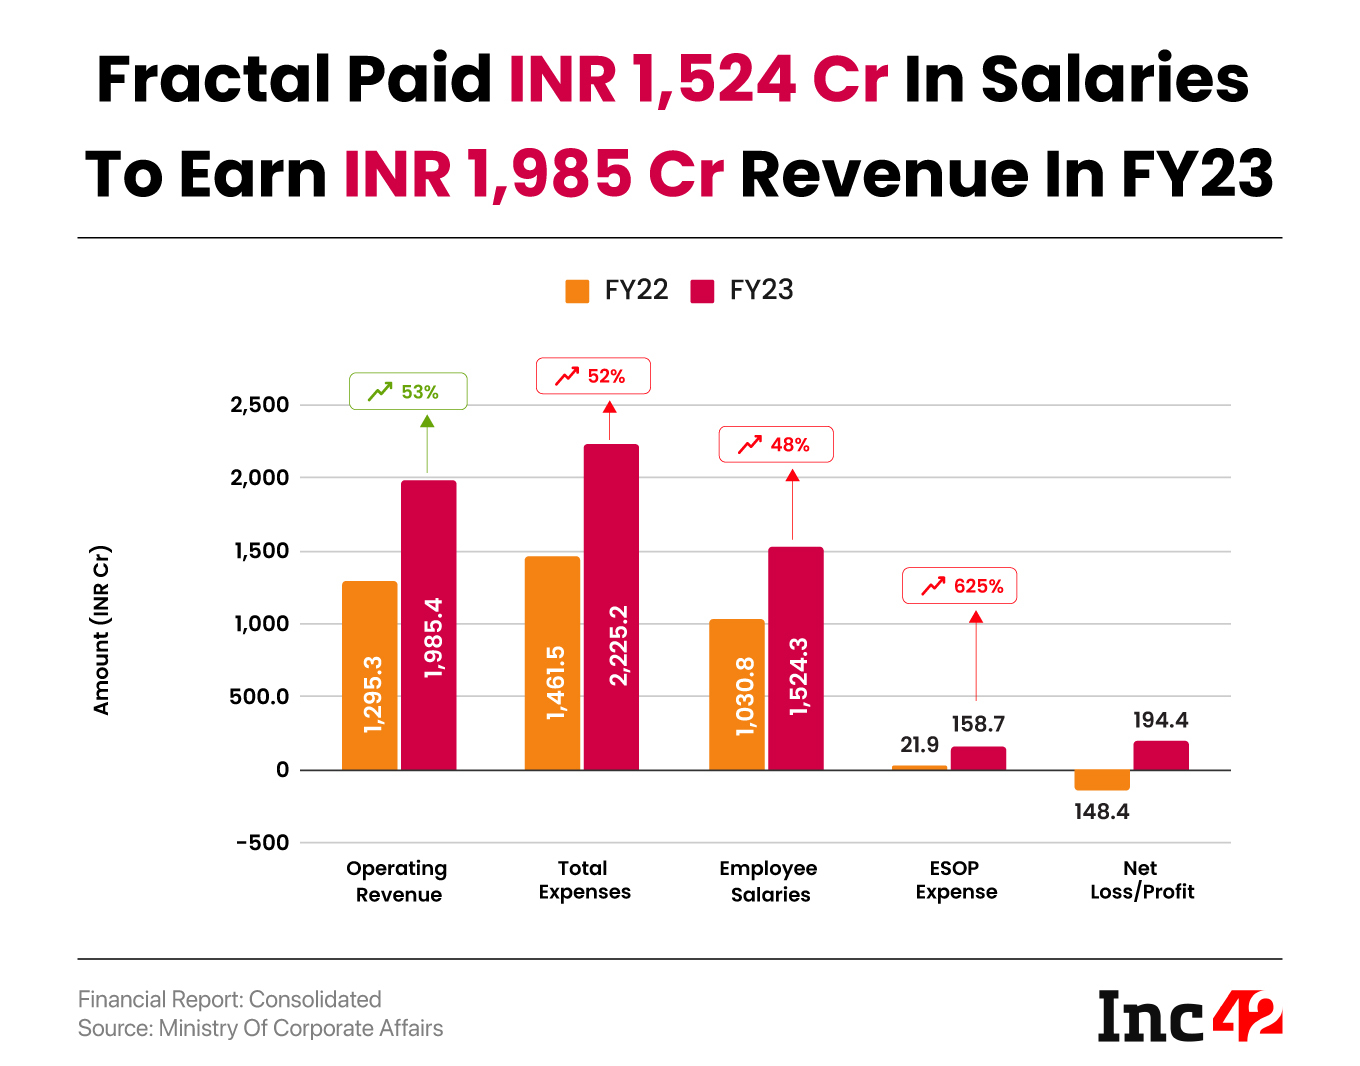 Exceptional Gain Helps SaaS Unicorn Fractal Post INR 194 Cr Profit In FY23 